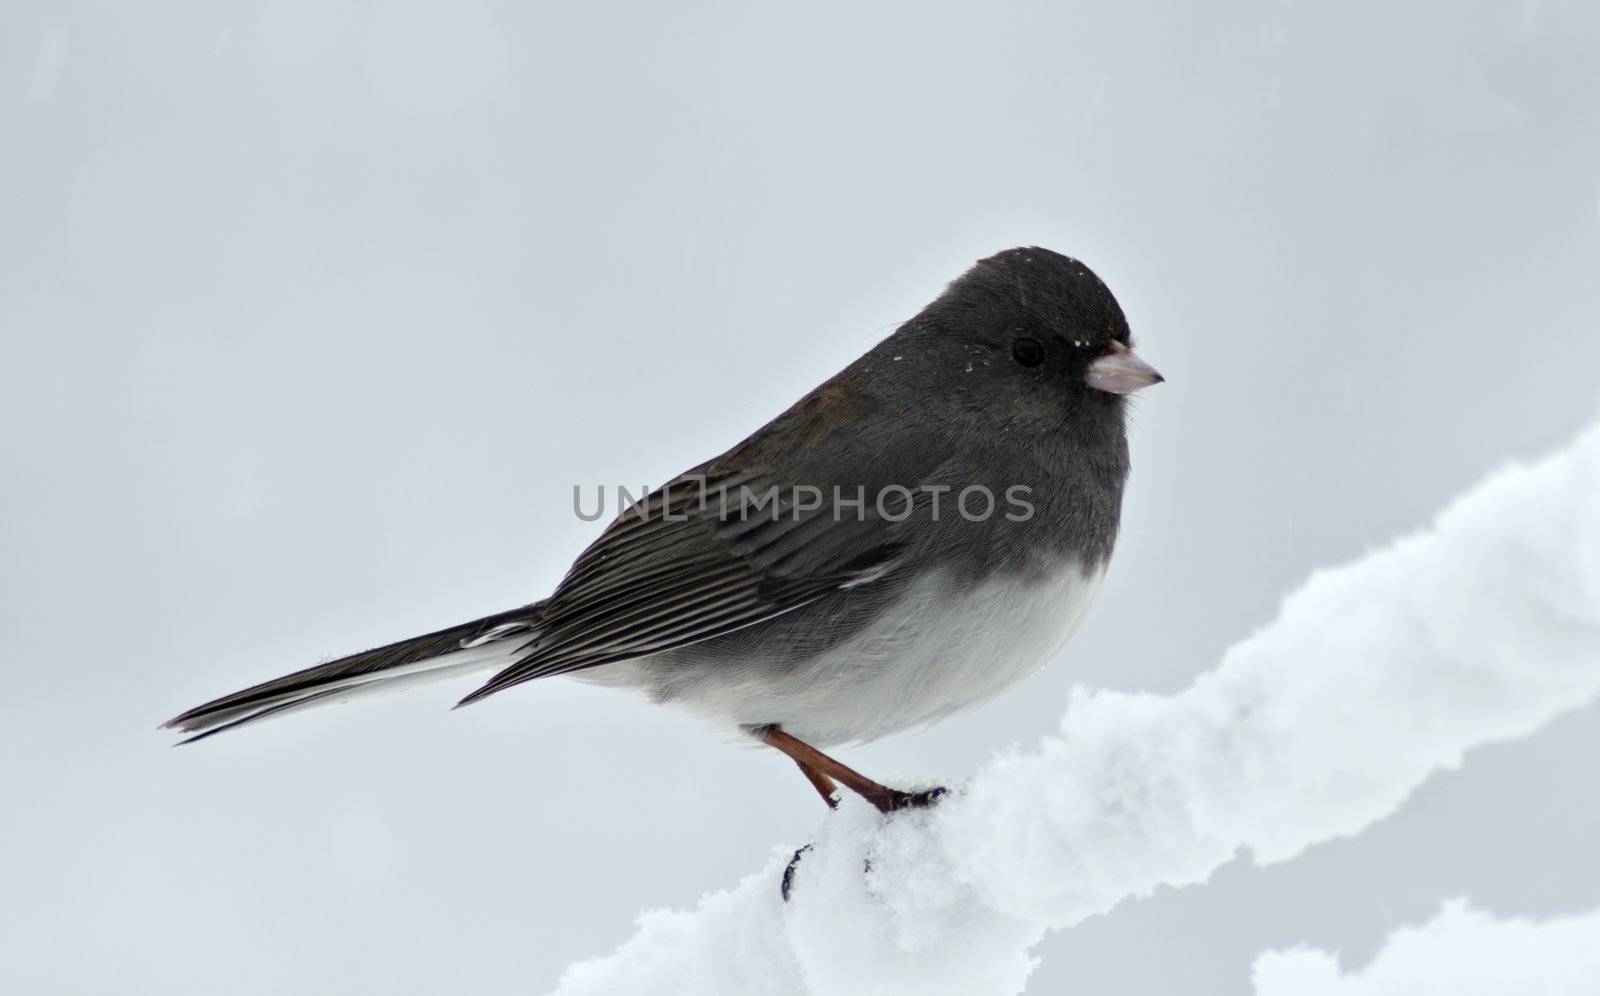 A Junco lands briefly on a snow covered clothesline during a winter snow storm.